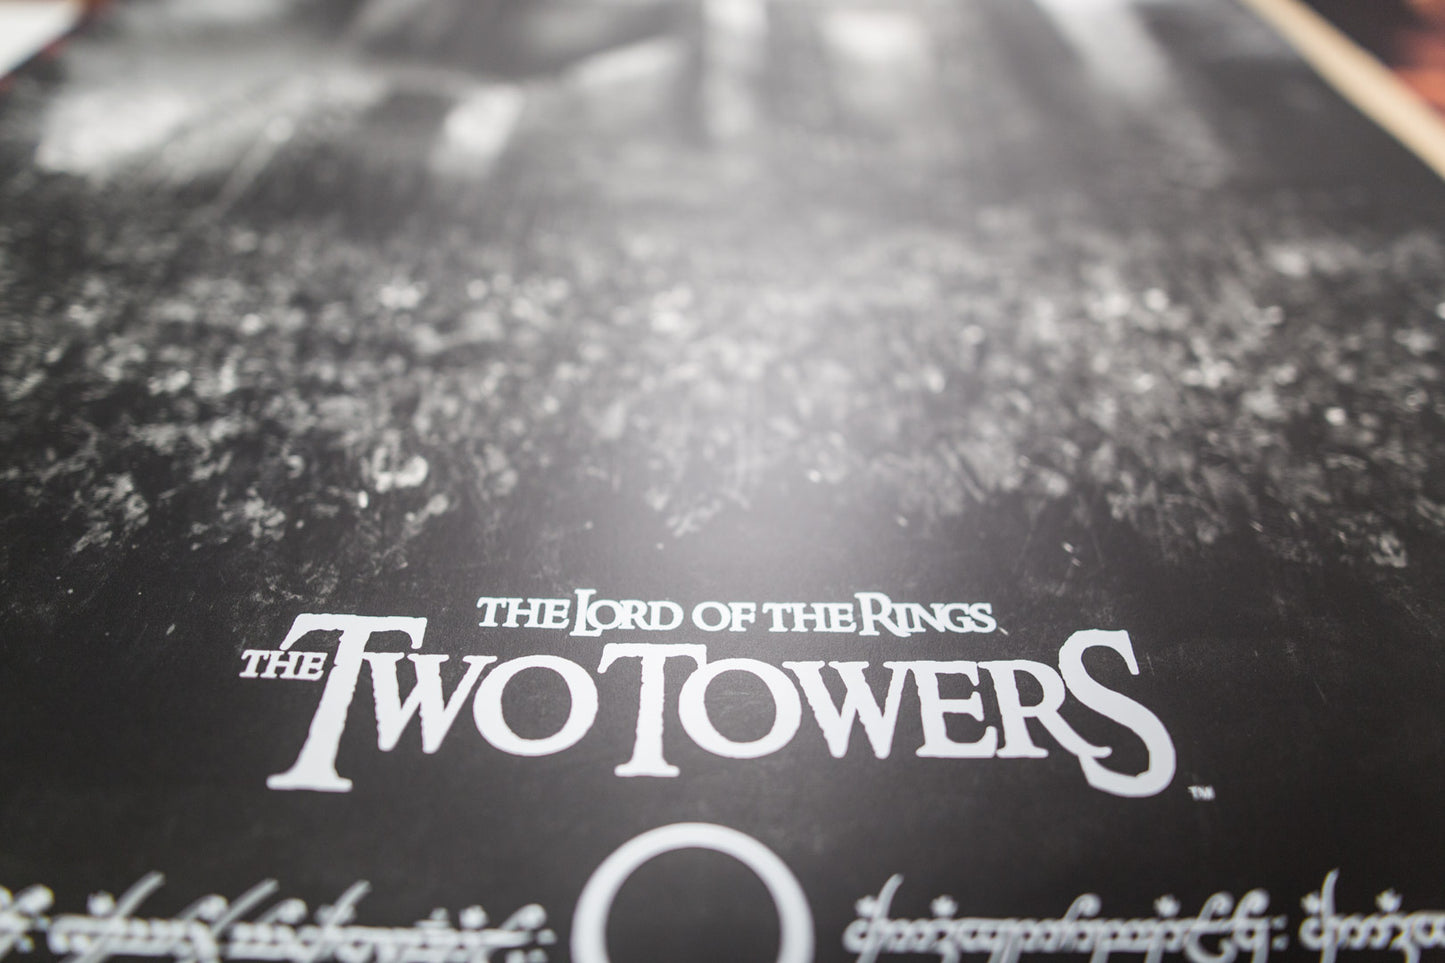 Karl Fitzgerald "The Lord of the Rings: The Two Towers" Variant